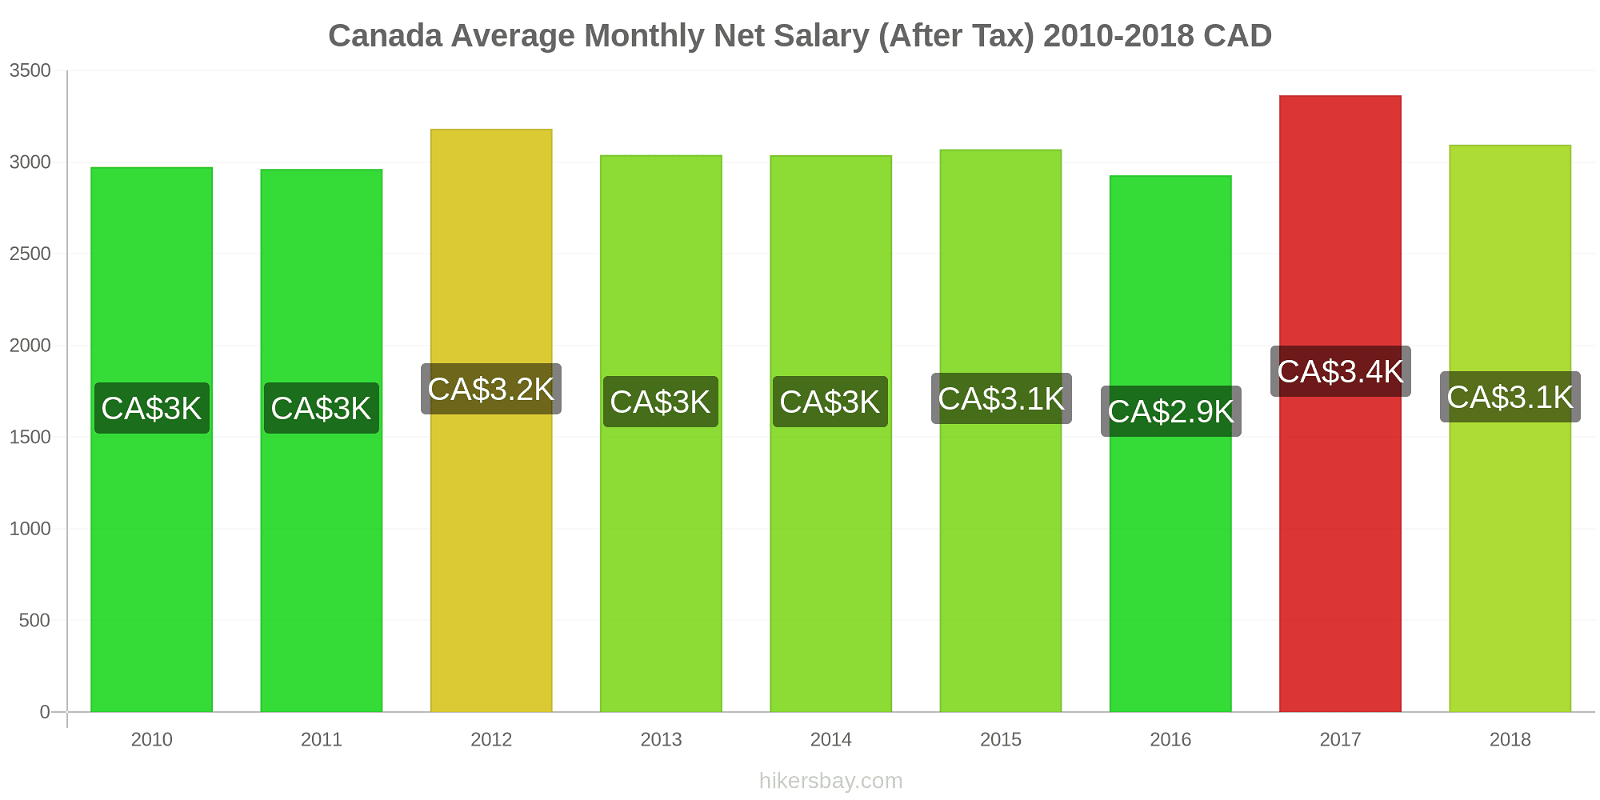 Canada price changes Average Monthly Net Salary (After Tax) hikersbay.com